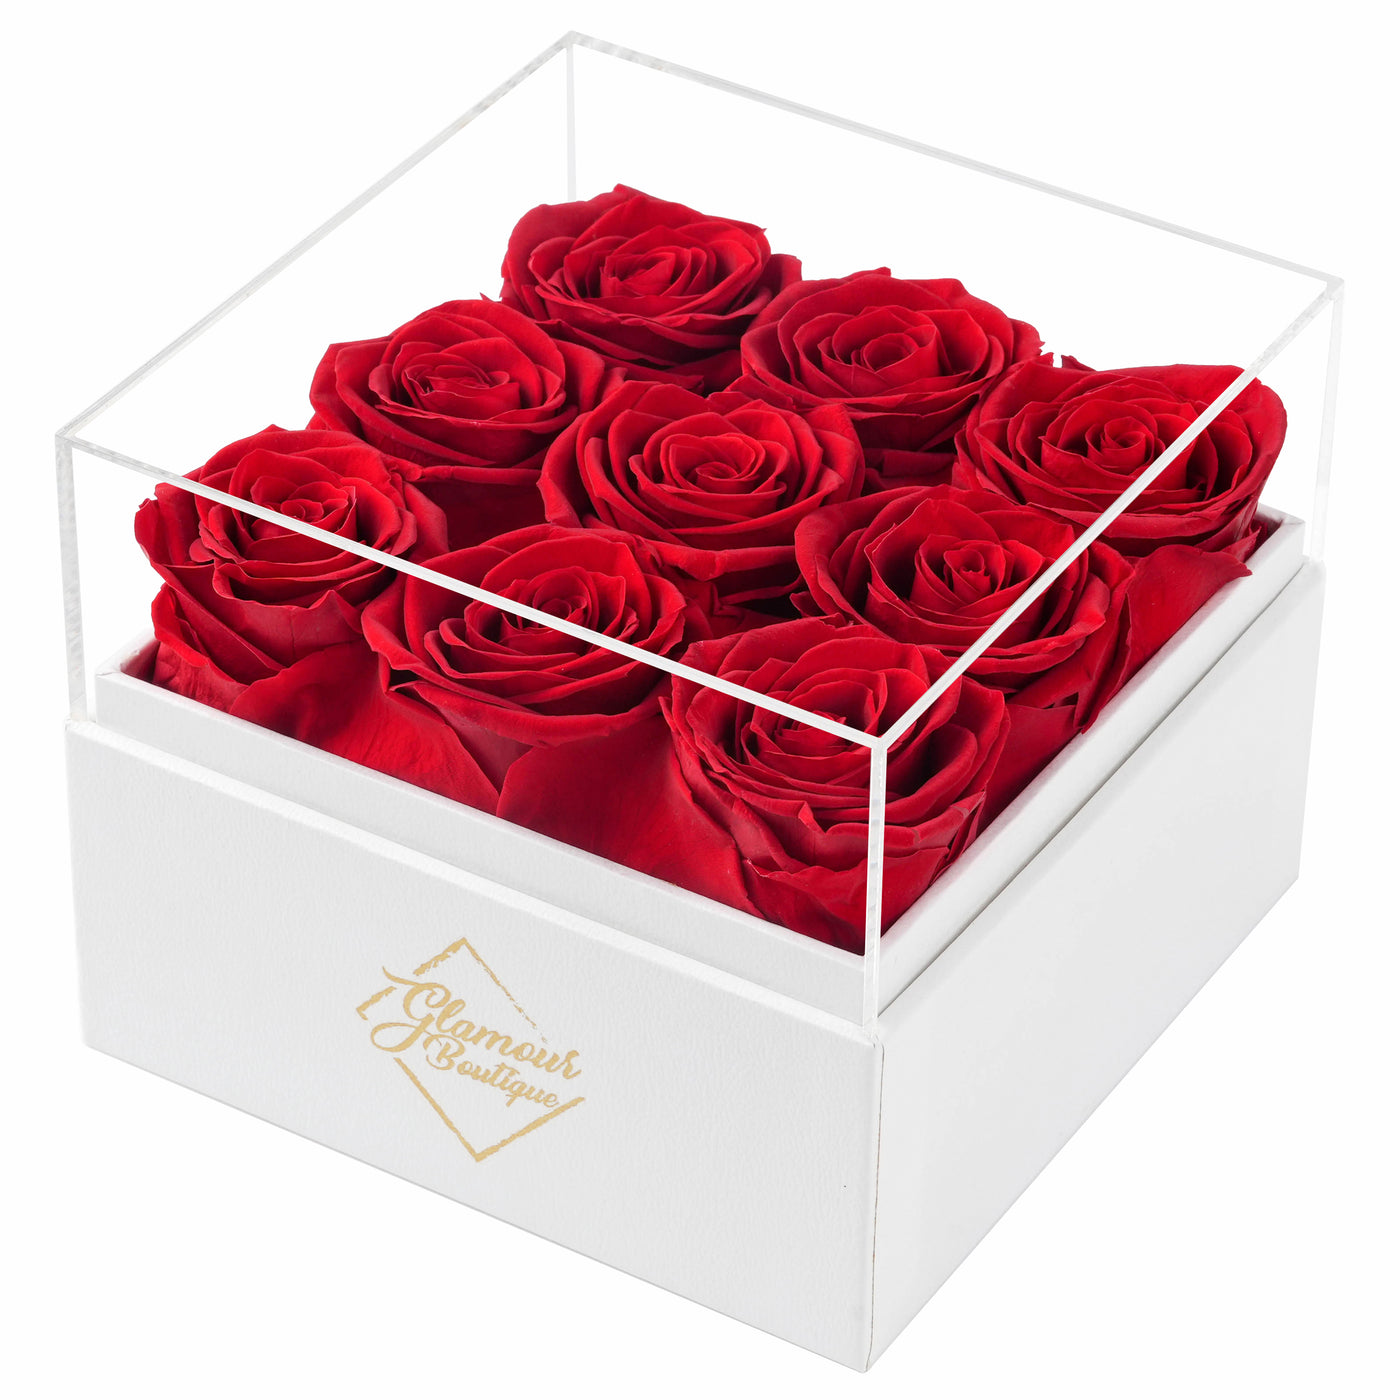 9 Preserved Roses Cased in White Box with Acrylic Cover - Red